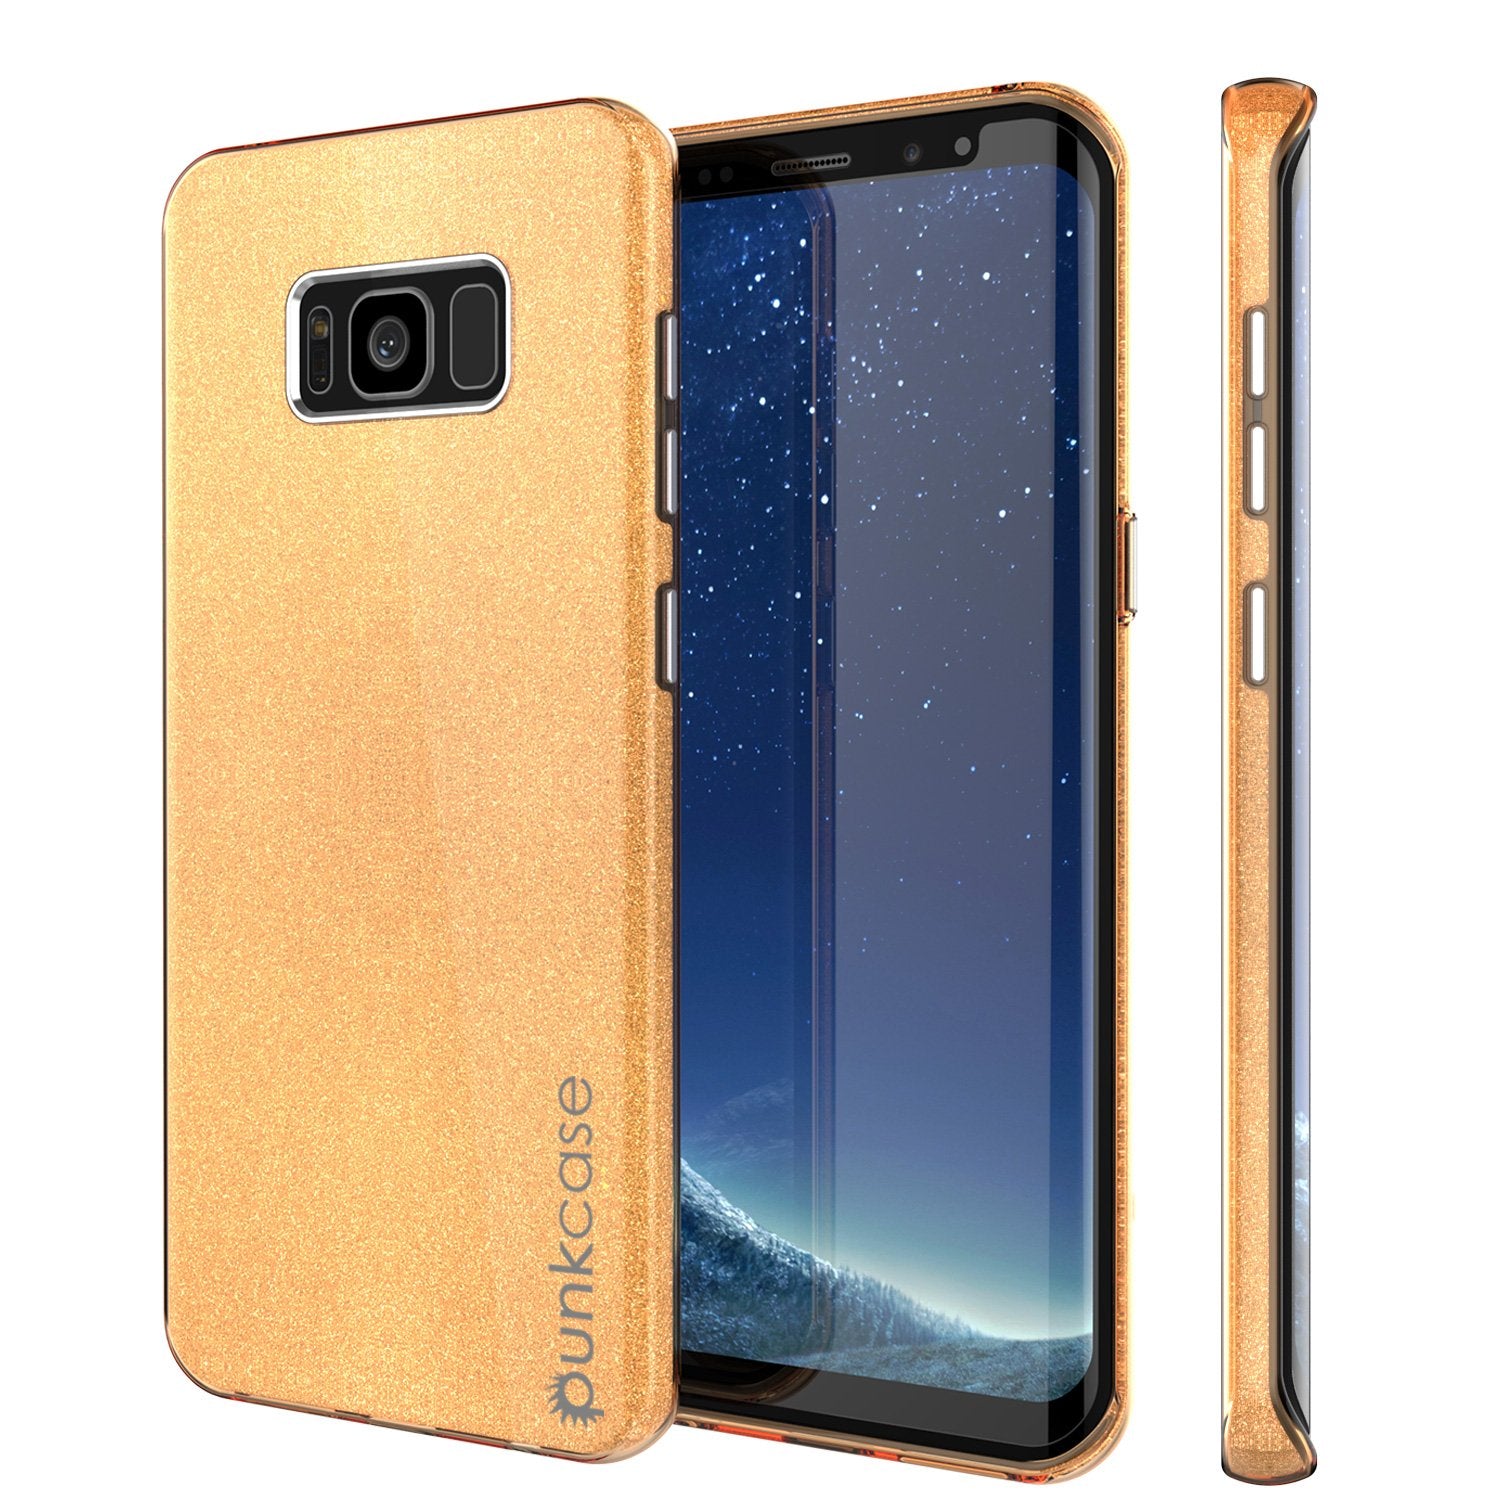 Galaxy S8 Plus Case, Punkcase Galactic 2.0 Series Ultra Slim Protective Armor TPU Cover [Gold]